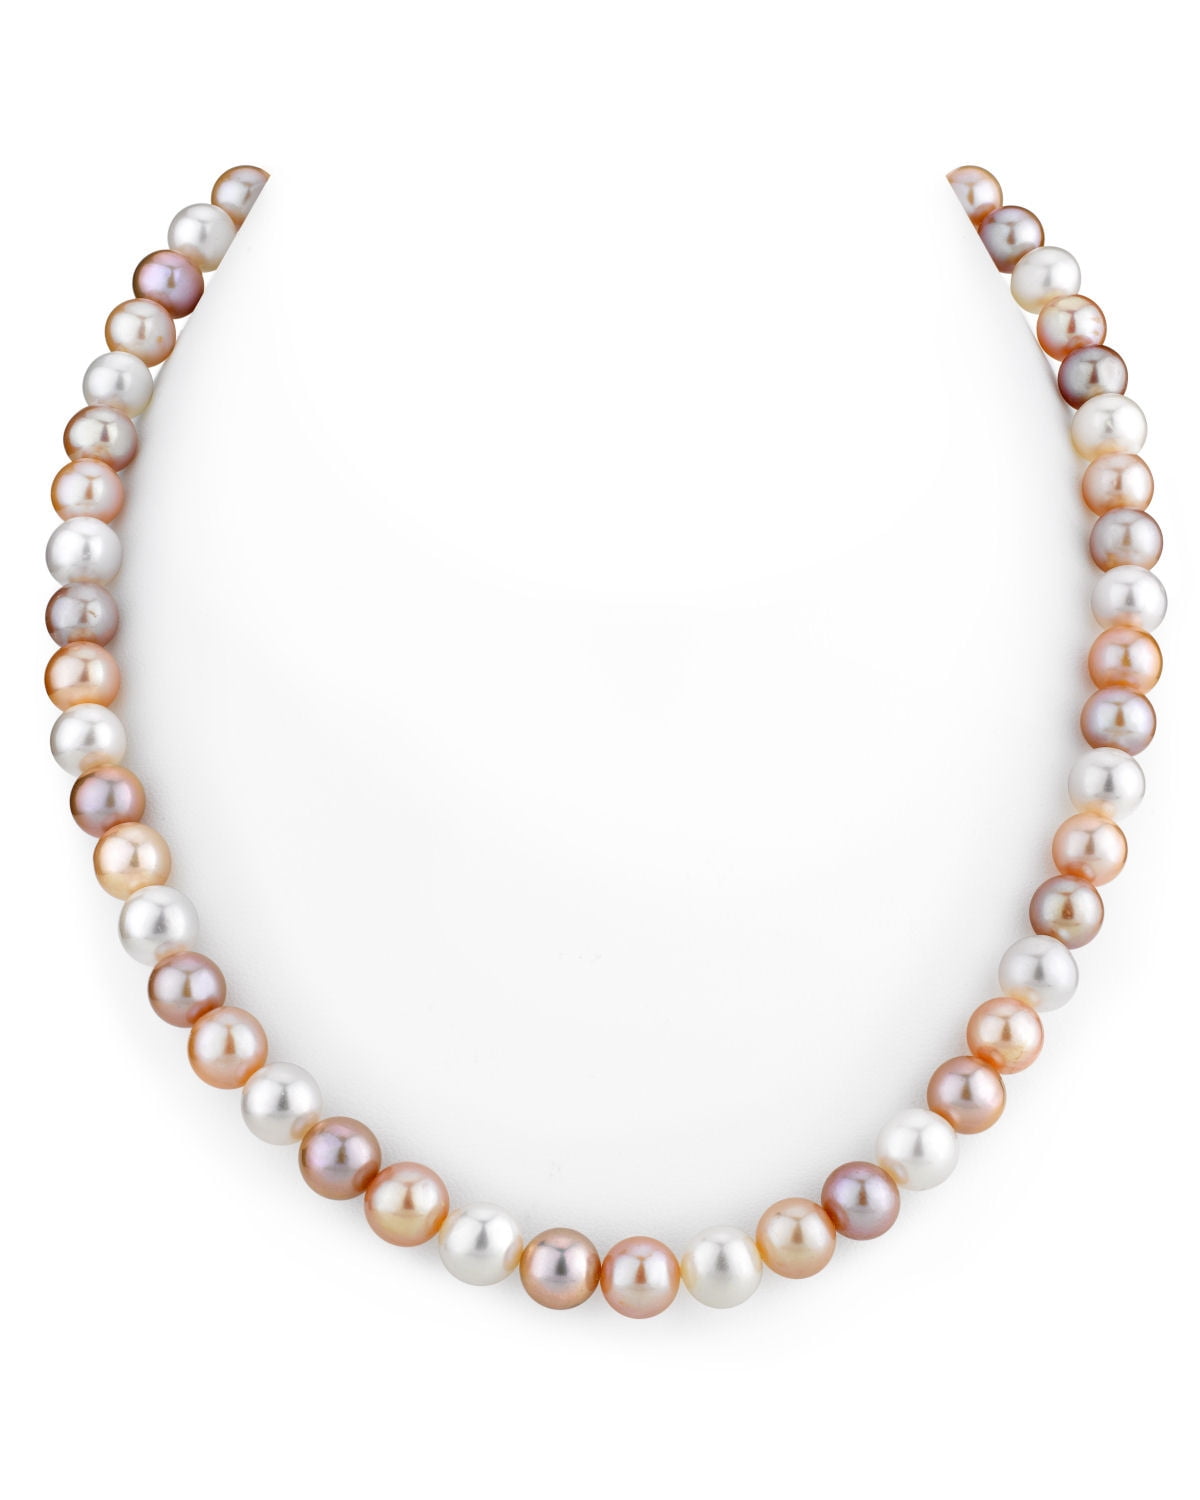 THE PEARL SOURCE 8-9mm AAA Quality Round Multicolor Freshwater Cultured Pearl Necklace for Women in 18 Princess Length